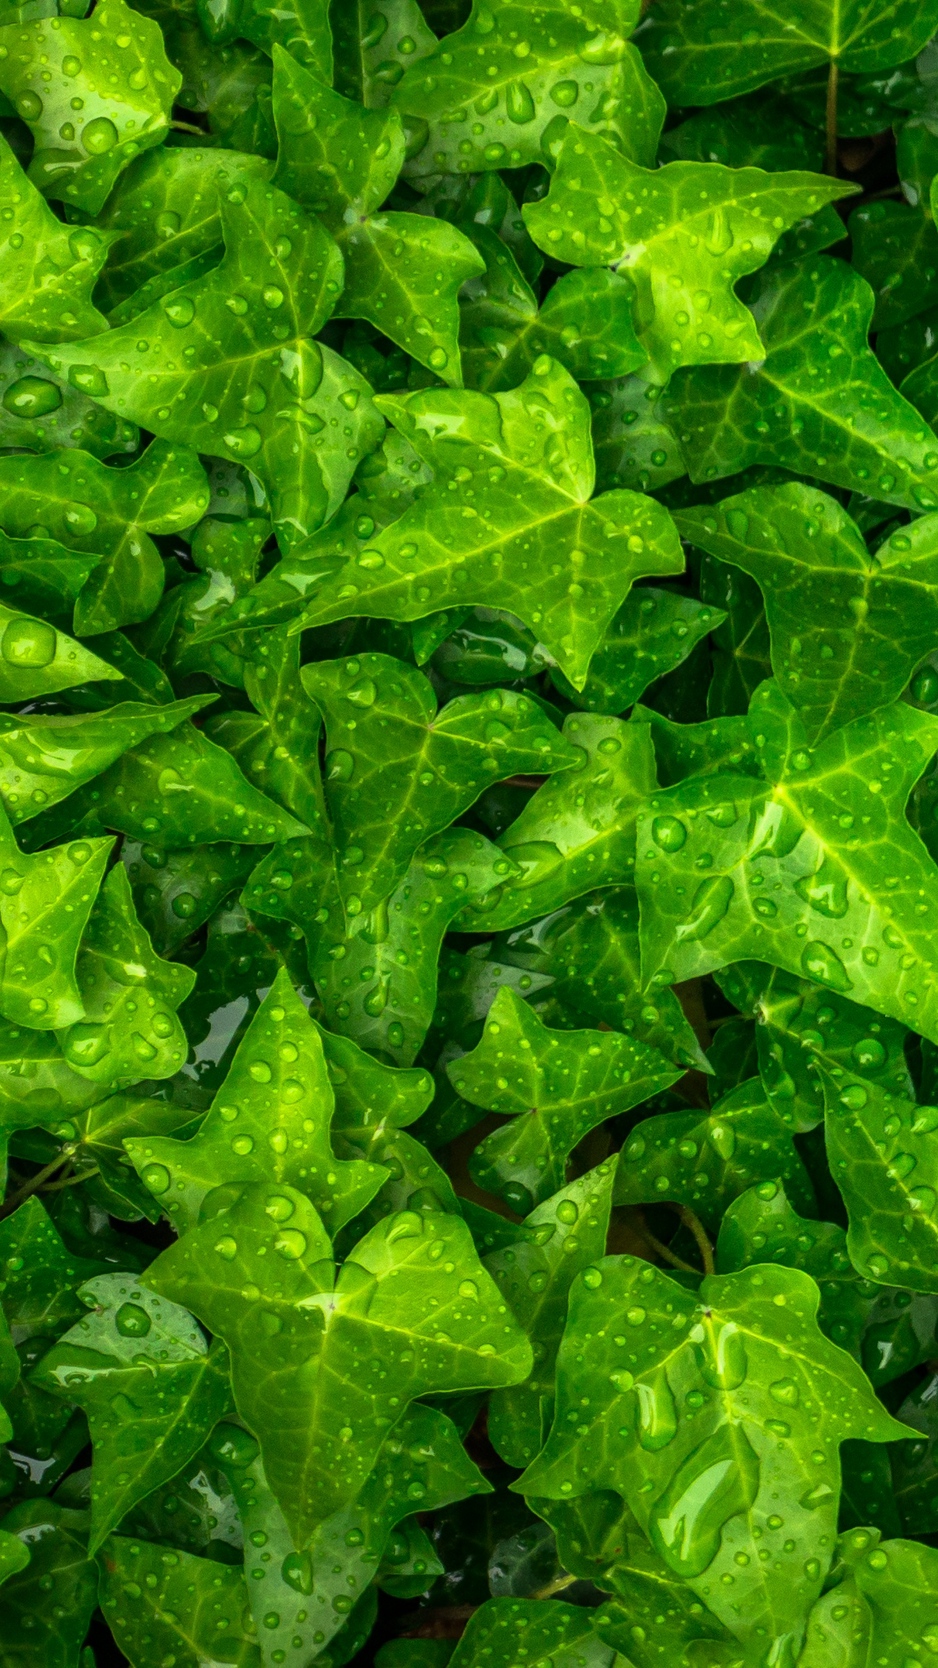 Wallpaper Ivy, Leaves, Drops, Plant, Green - Ivy Leaves Background - HD Wallpaper 